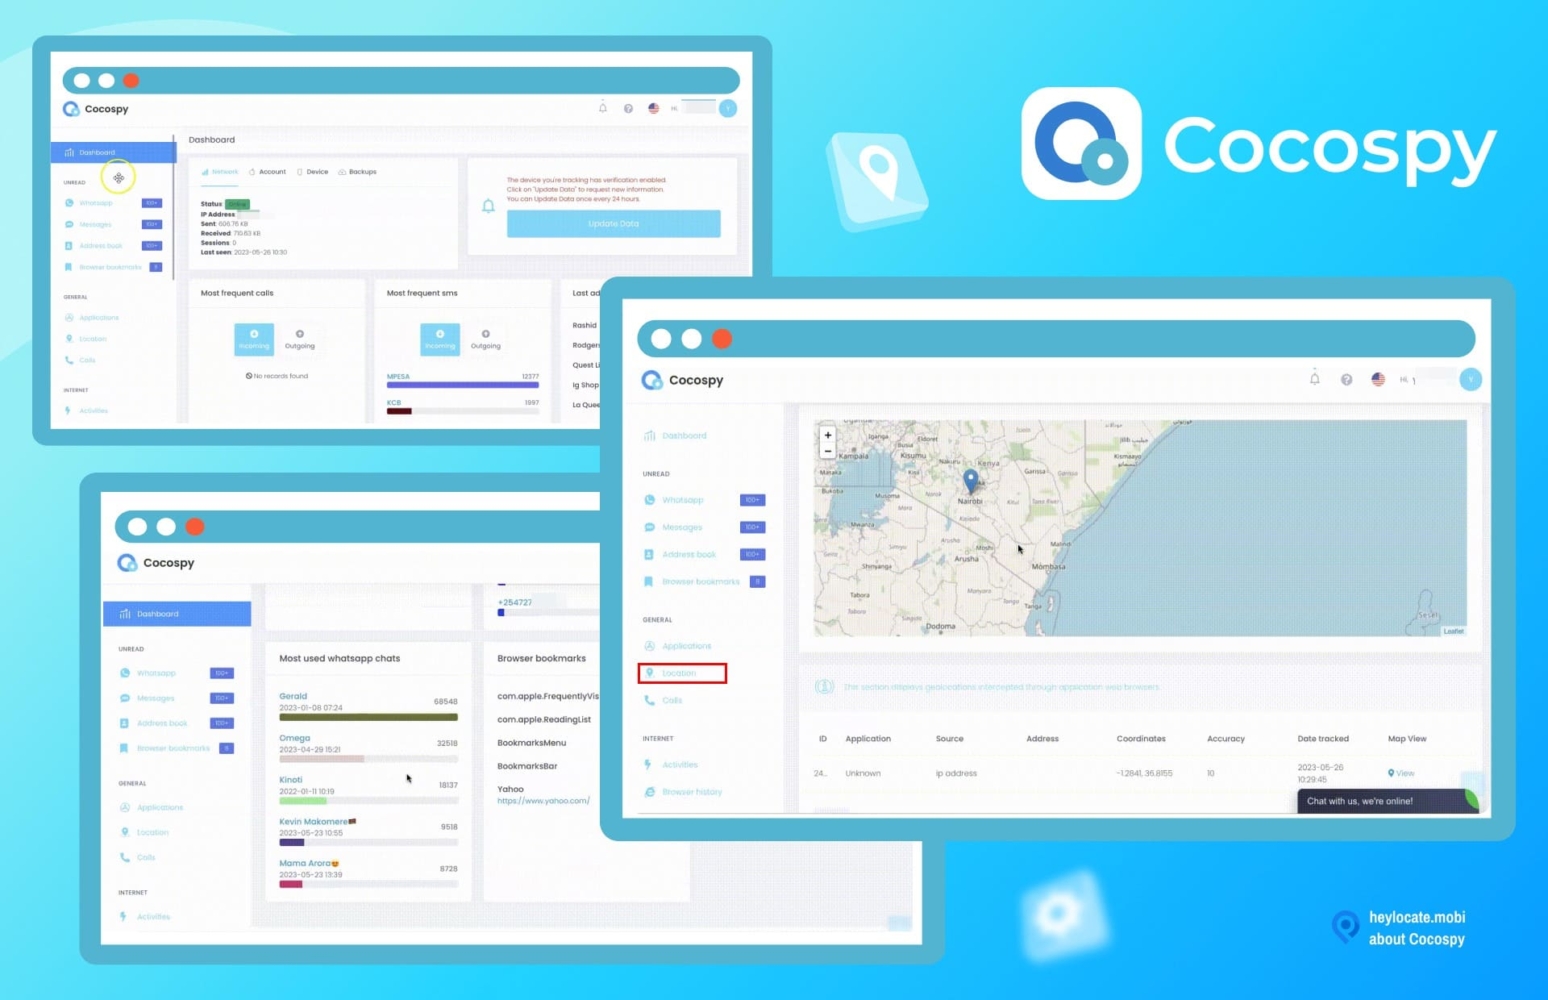 A collage showcasing various screenshots of the Cocospy application interface. The images include different panels such as a dashboard, location tracker with a map, and most used WhatsApp chats.